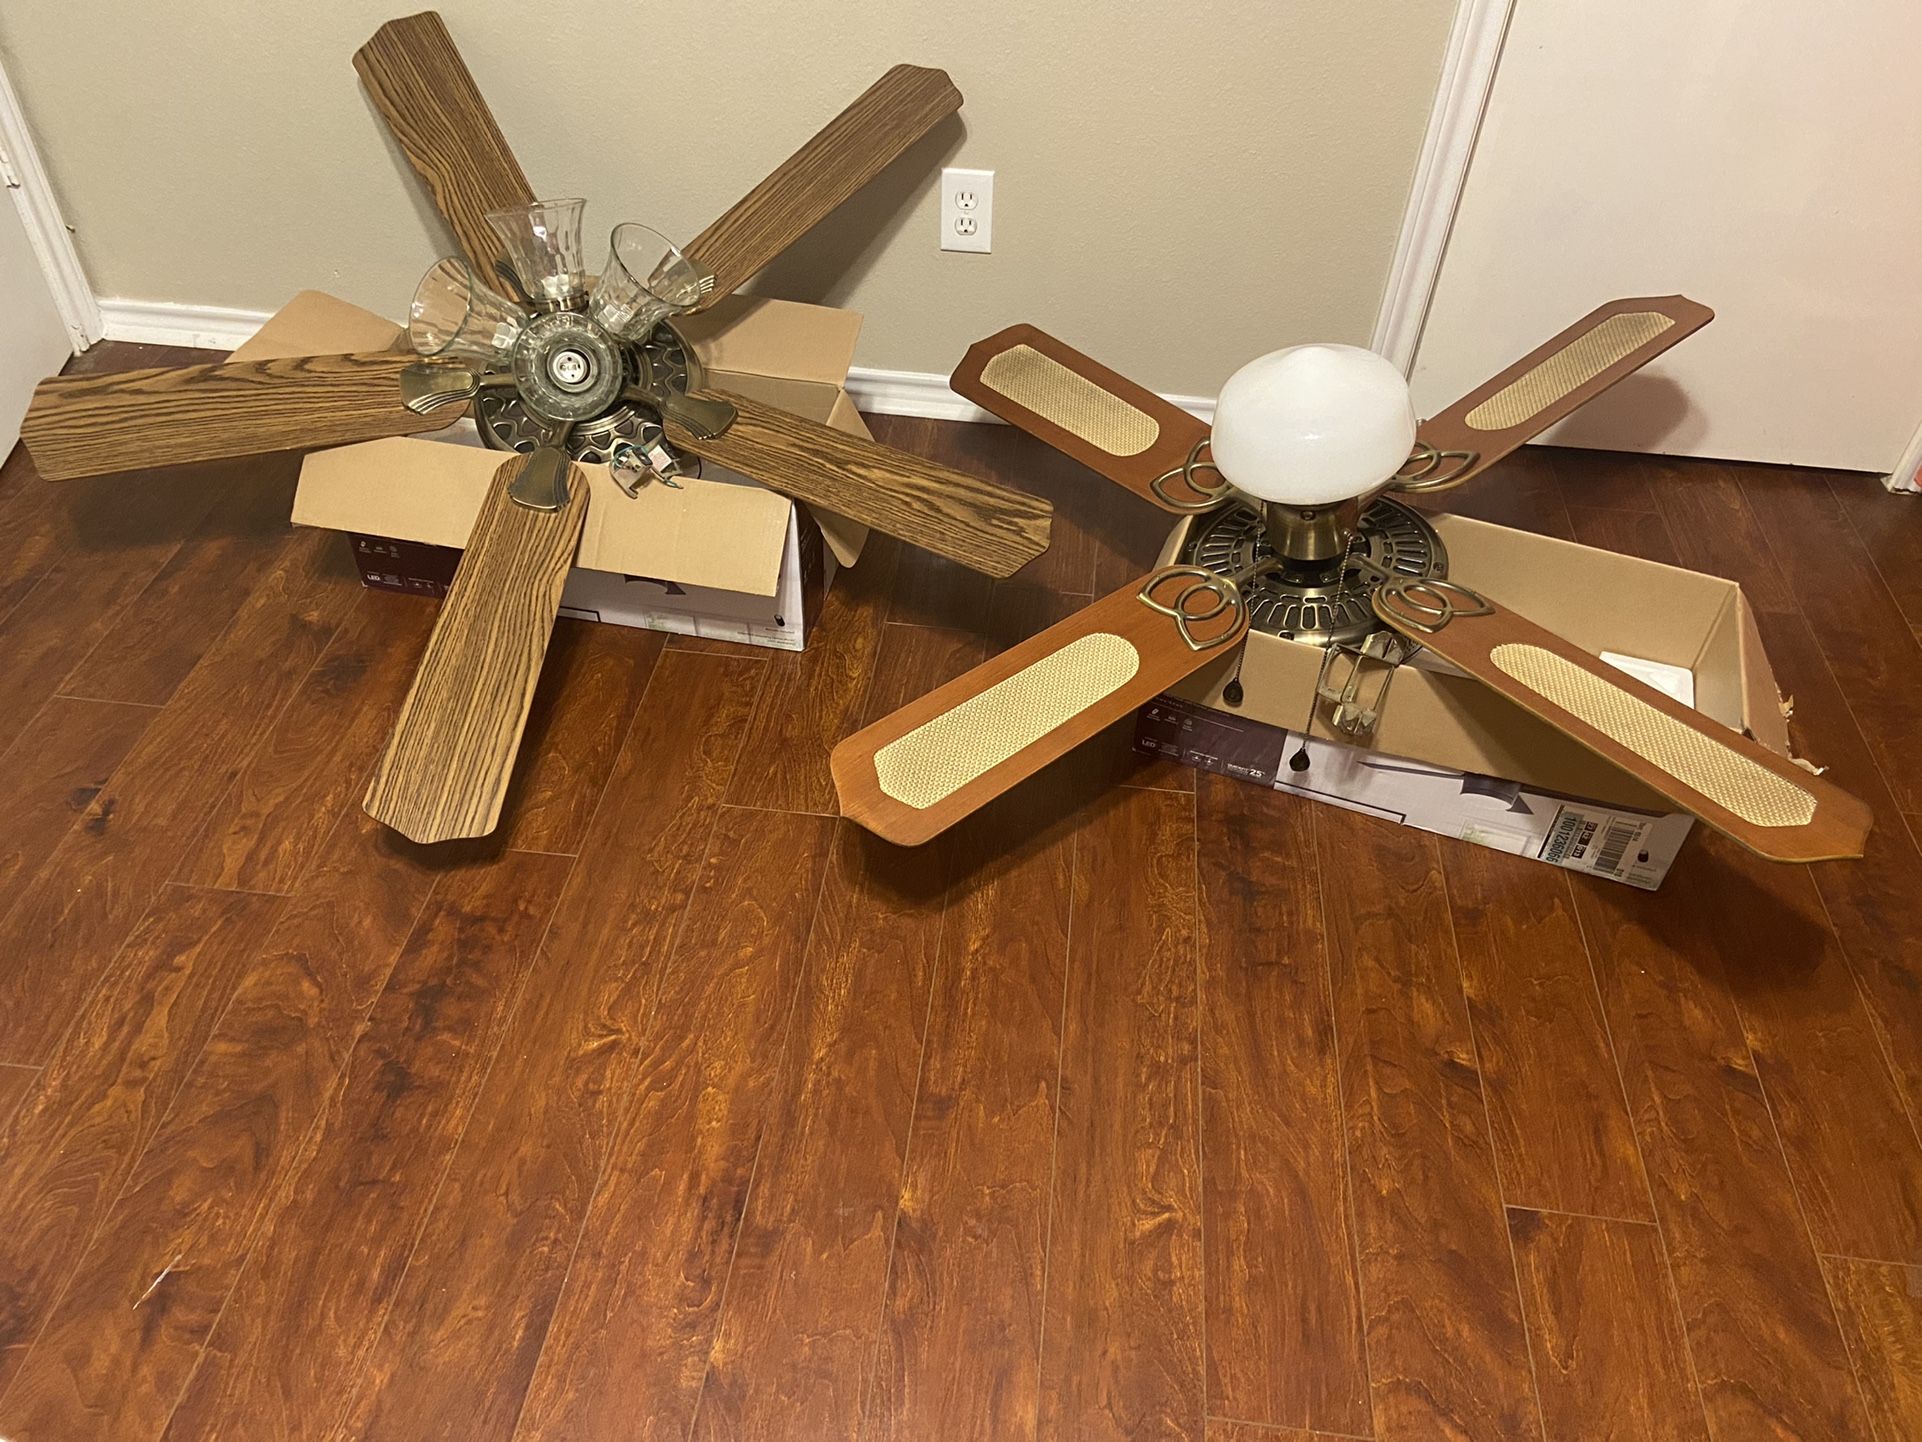 TWO CEILING FANS - $125 EACH